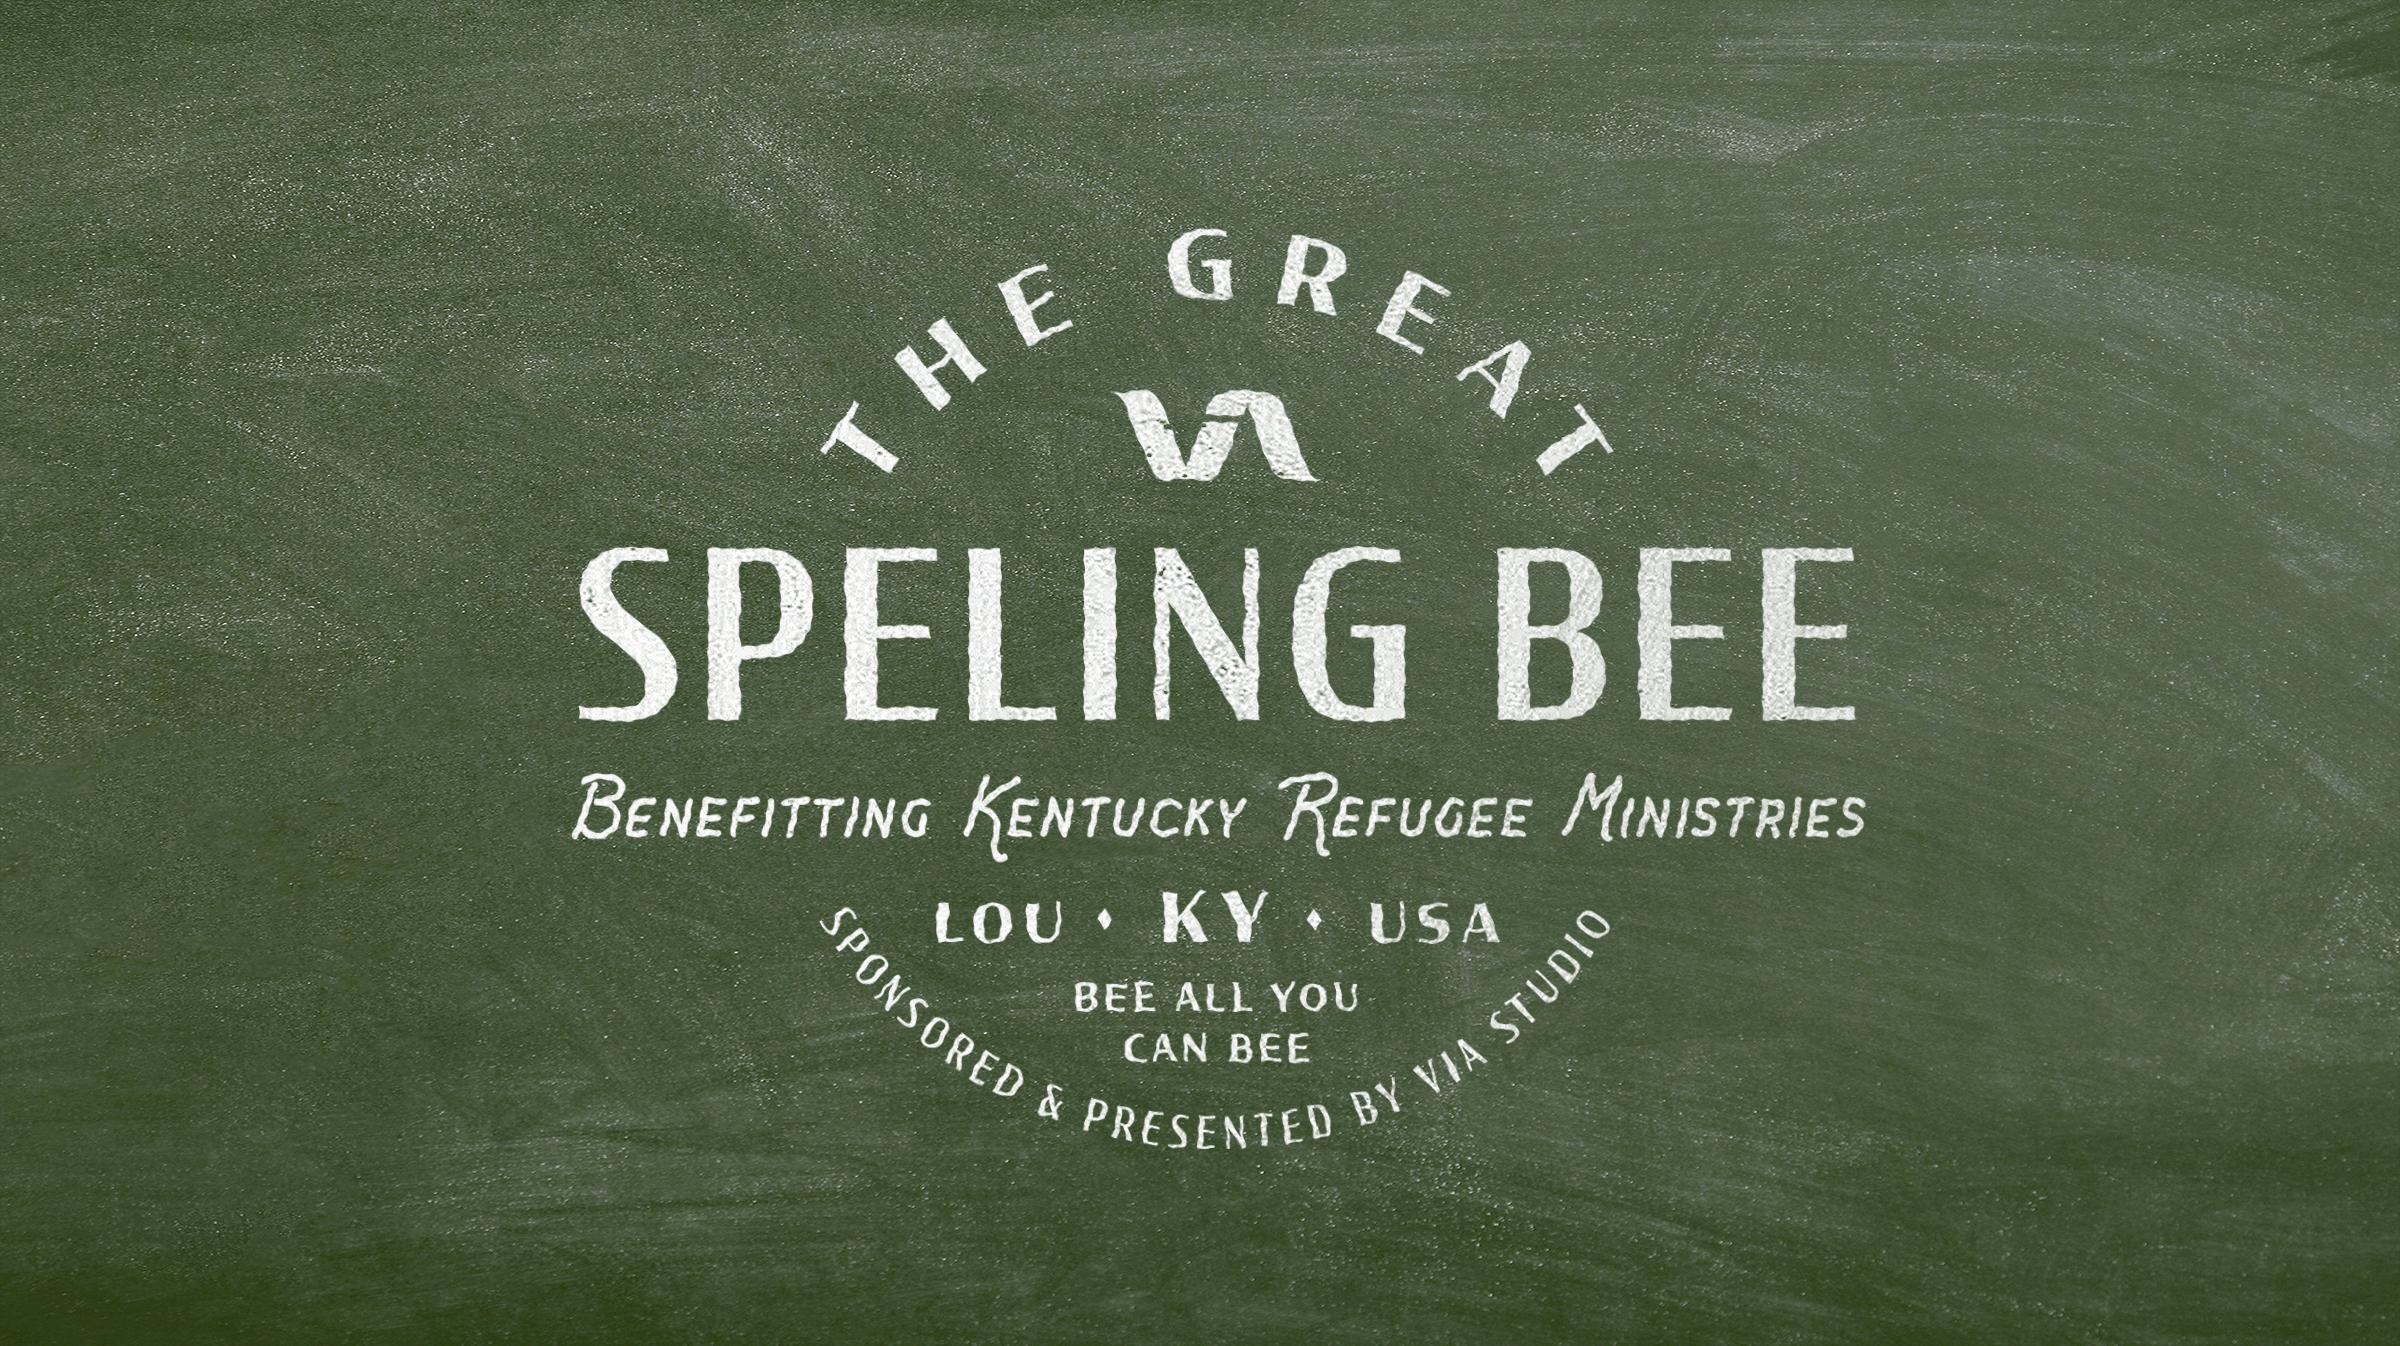 Charity event spelling bee logo design.